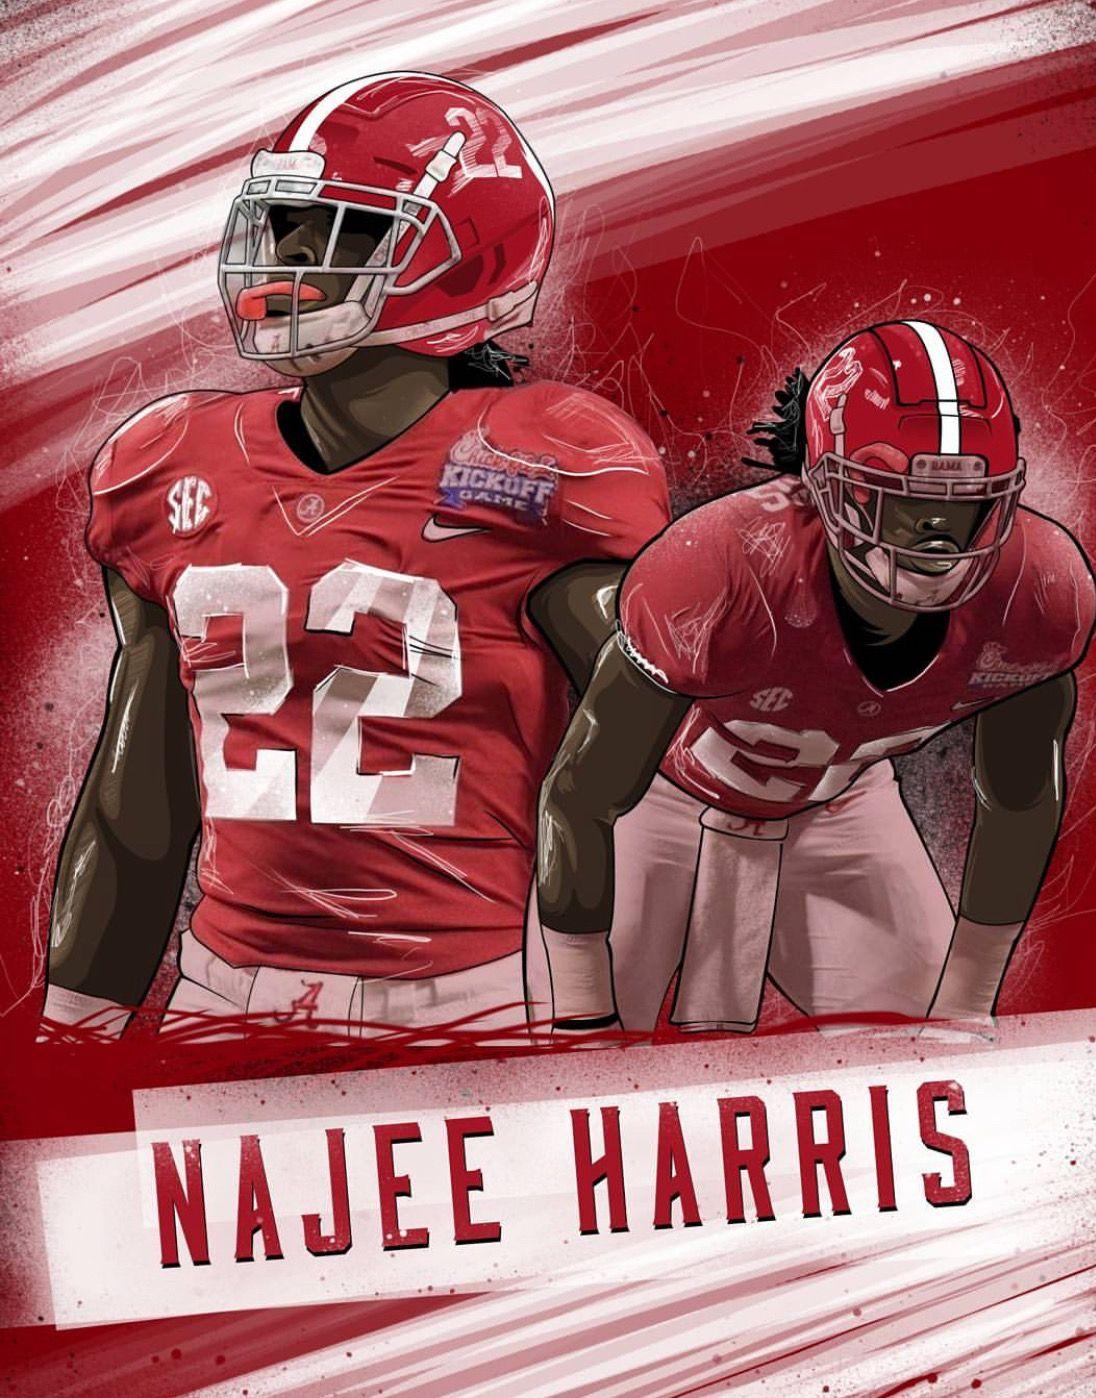 College Football on ESPN  Najee Harris 5 TDs are the most scored in a  game in SEC championship game history  via SEC Network  Facebook